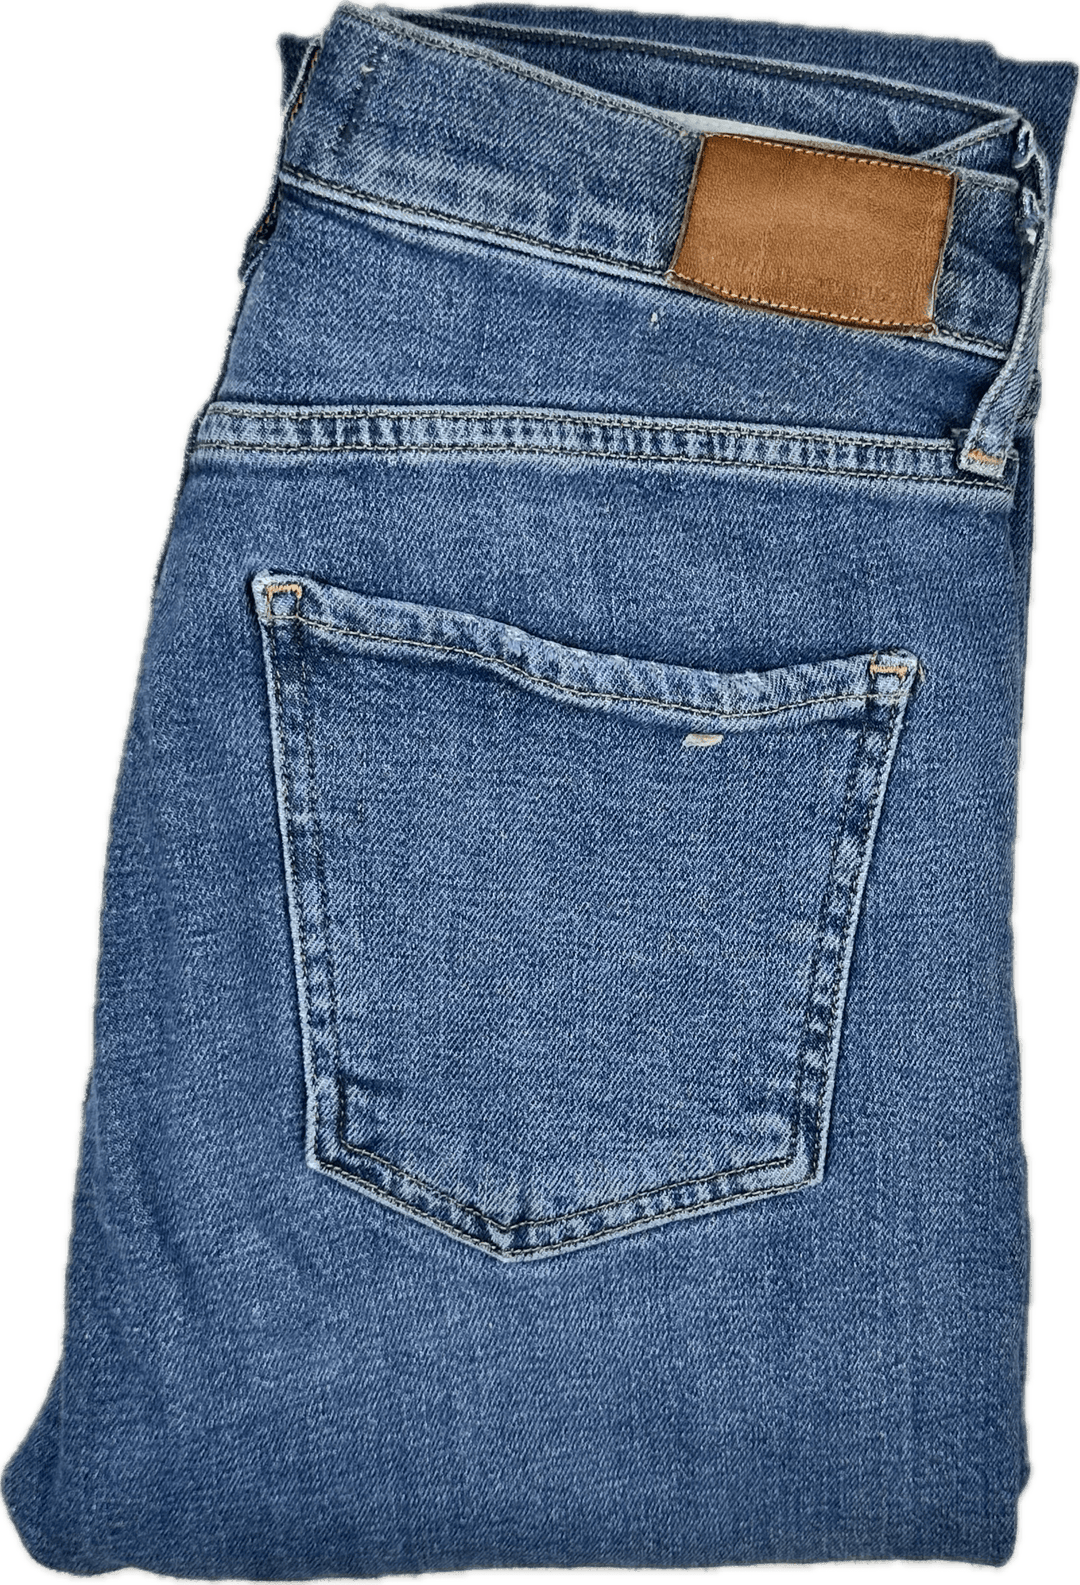 Citizens of Humanity 'Charlotte' High Rise Straight Jeans - Size 26 - Jean Pool